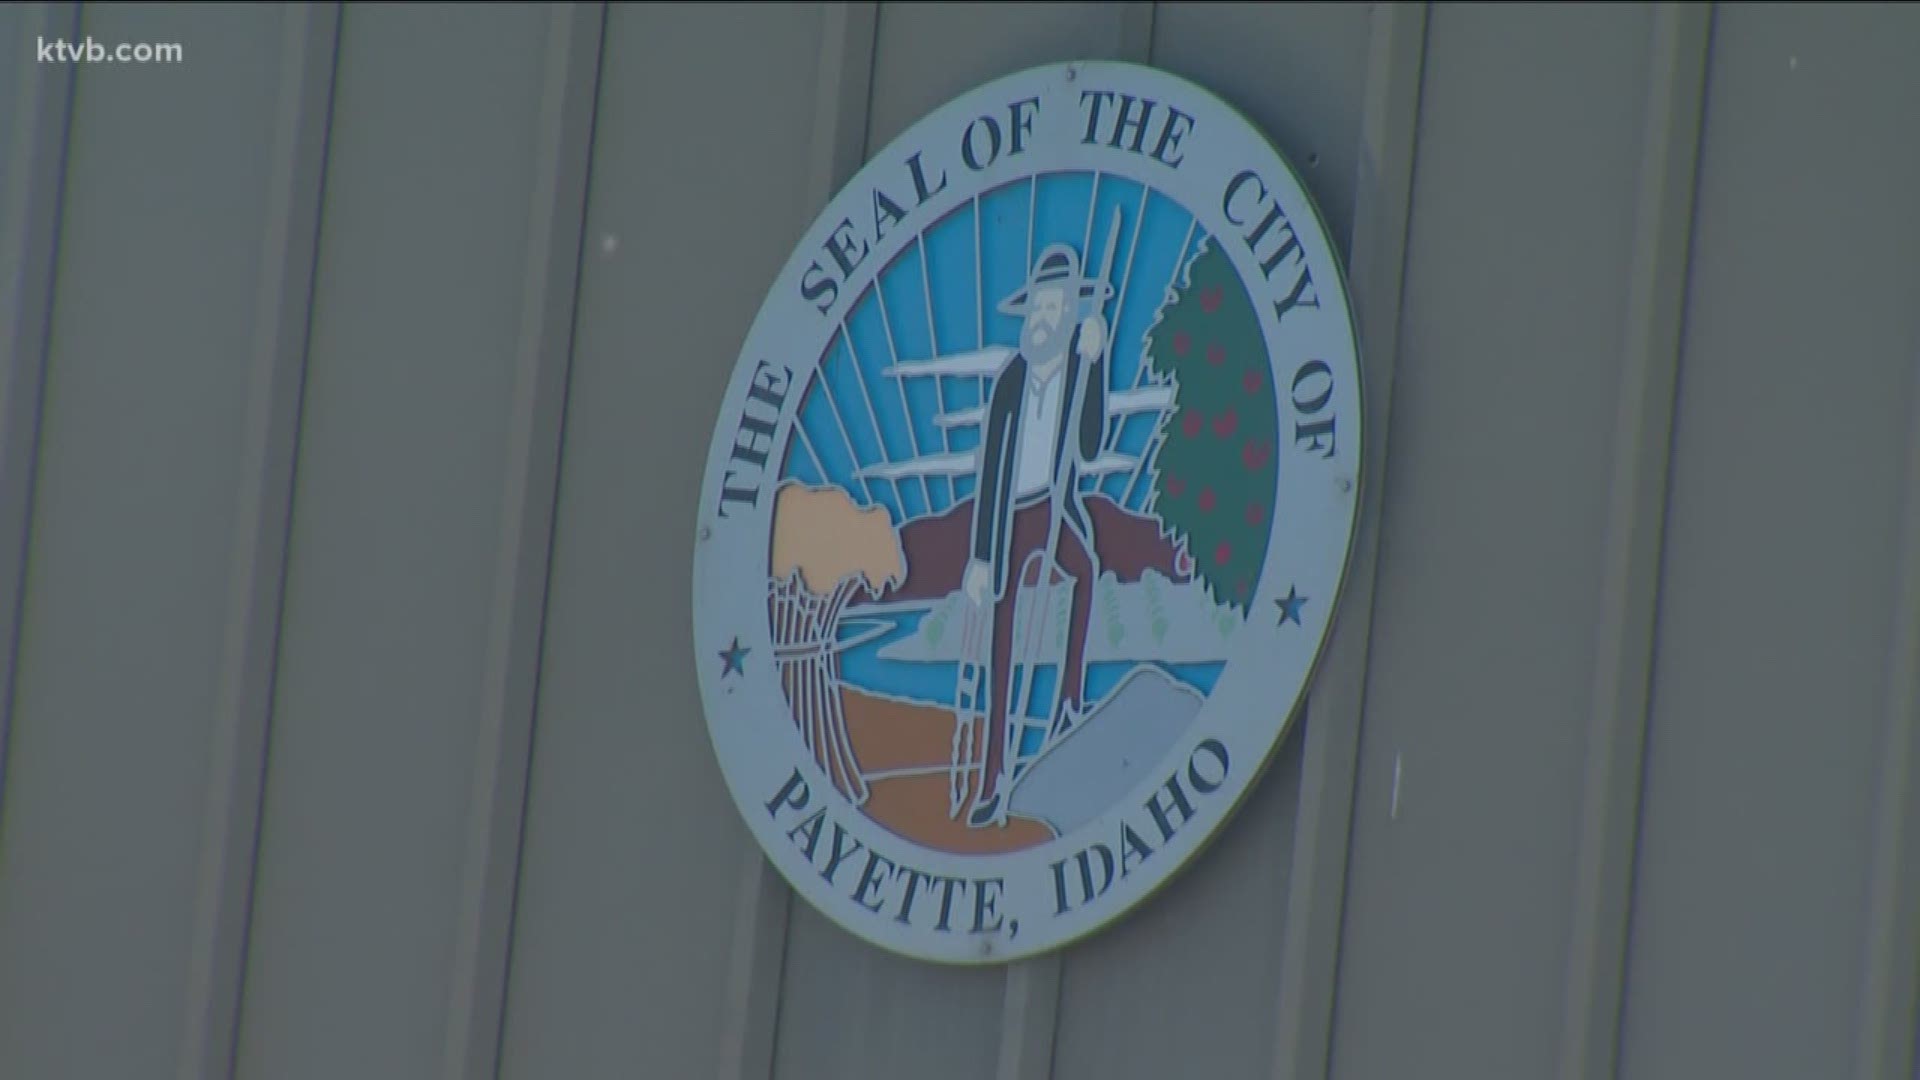 A dispute is happening between the county of Payette and the city that could change the way they handle non-emergency 911 calls. At issue: a fee hike for those services.
